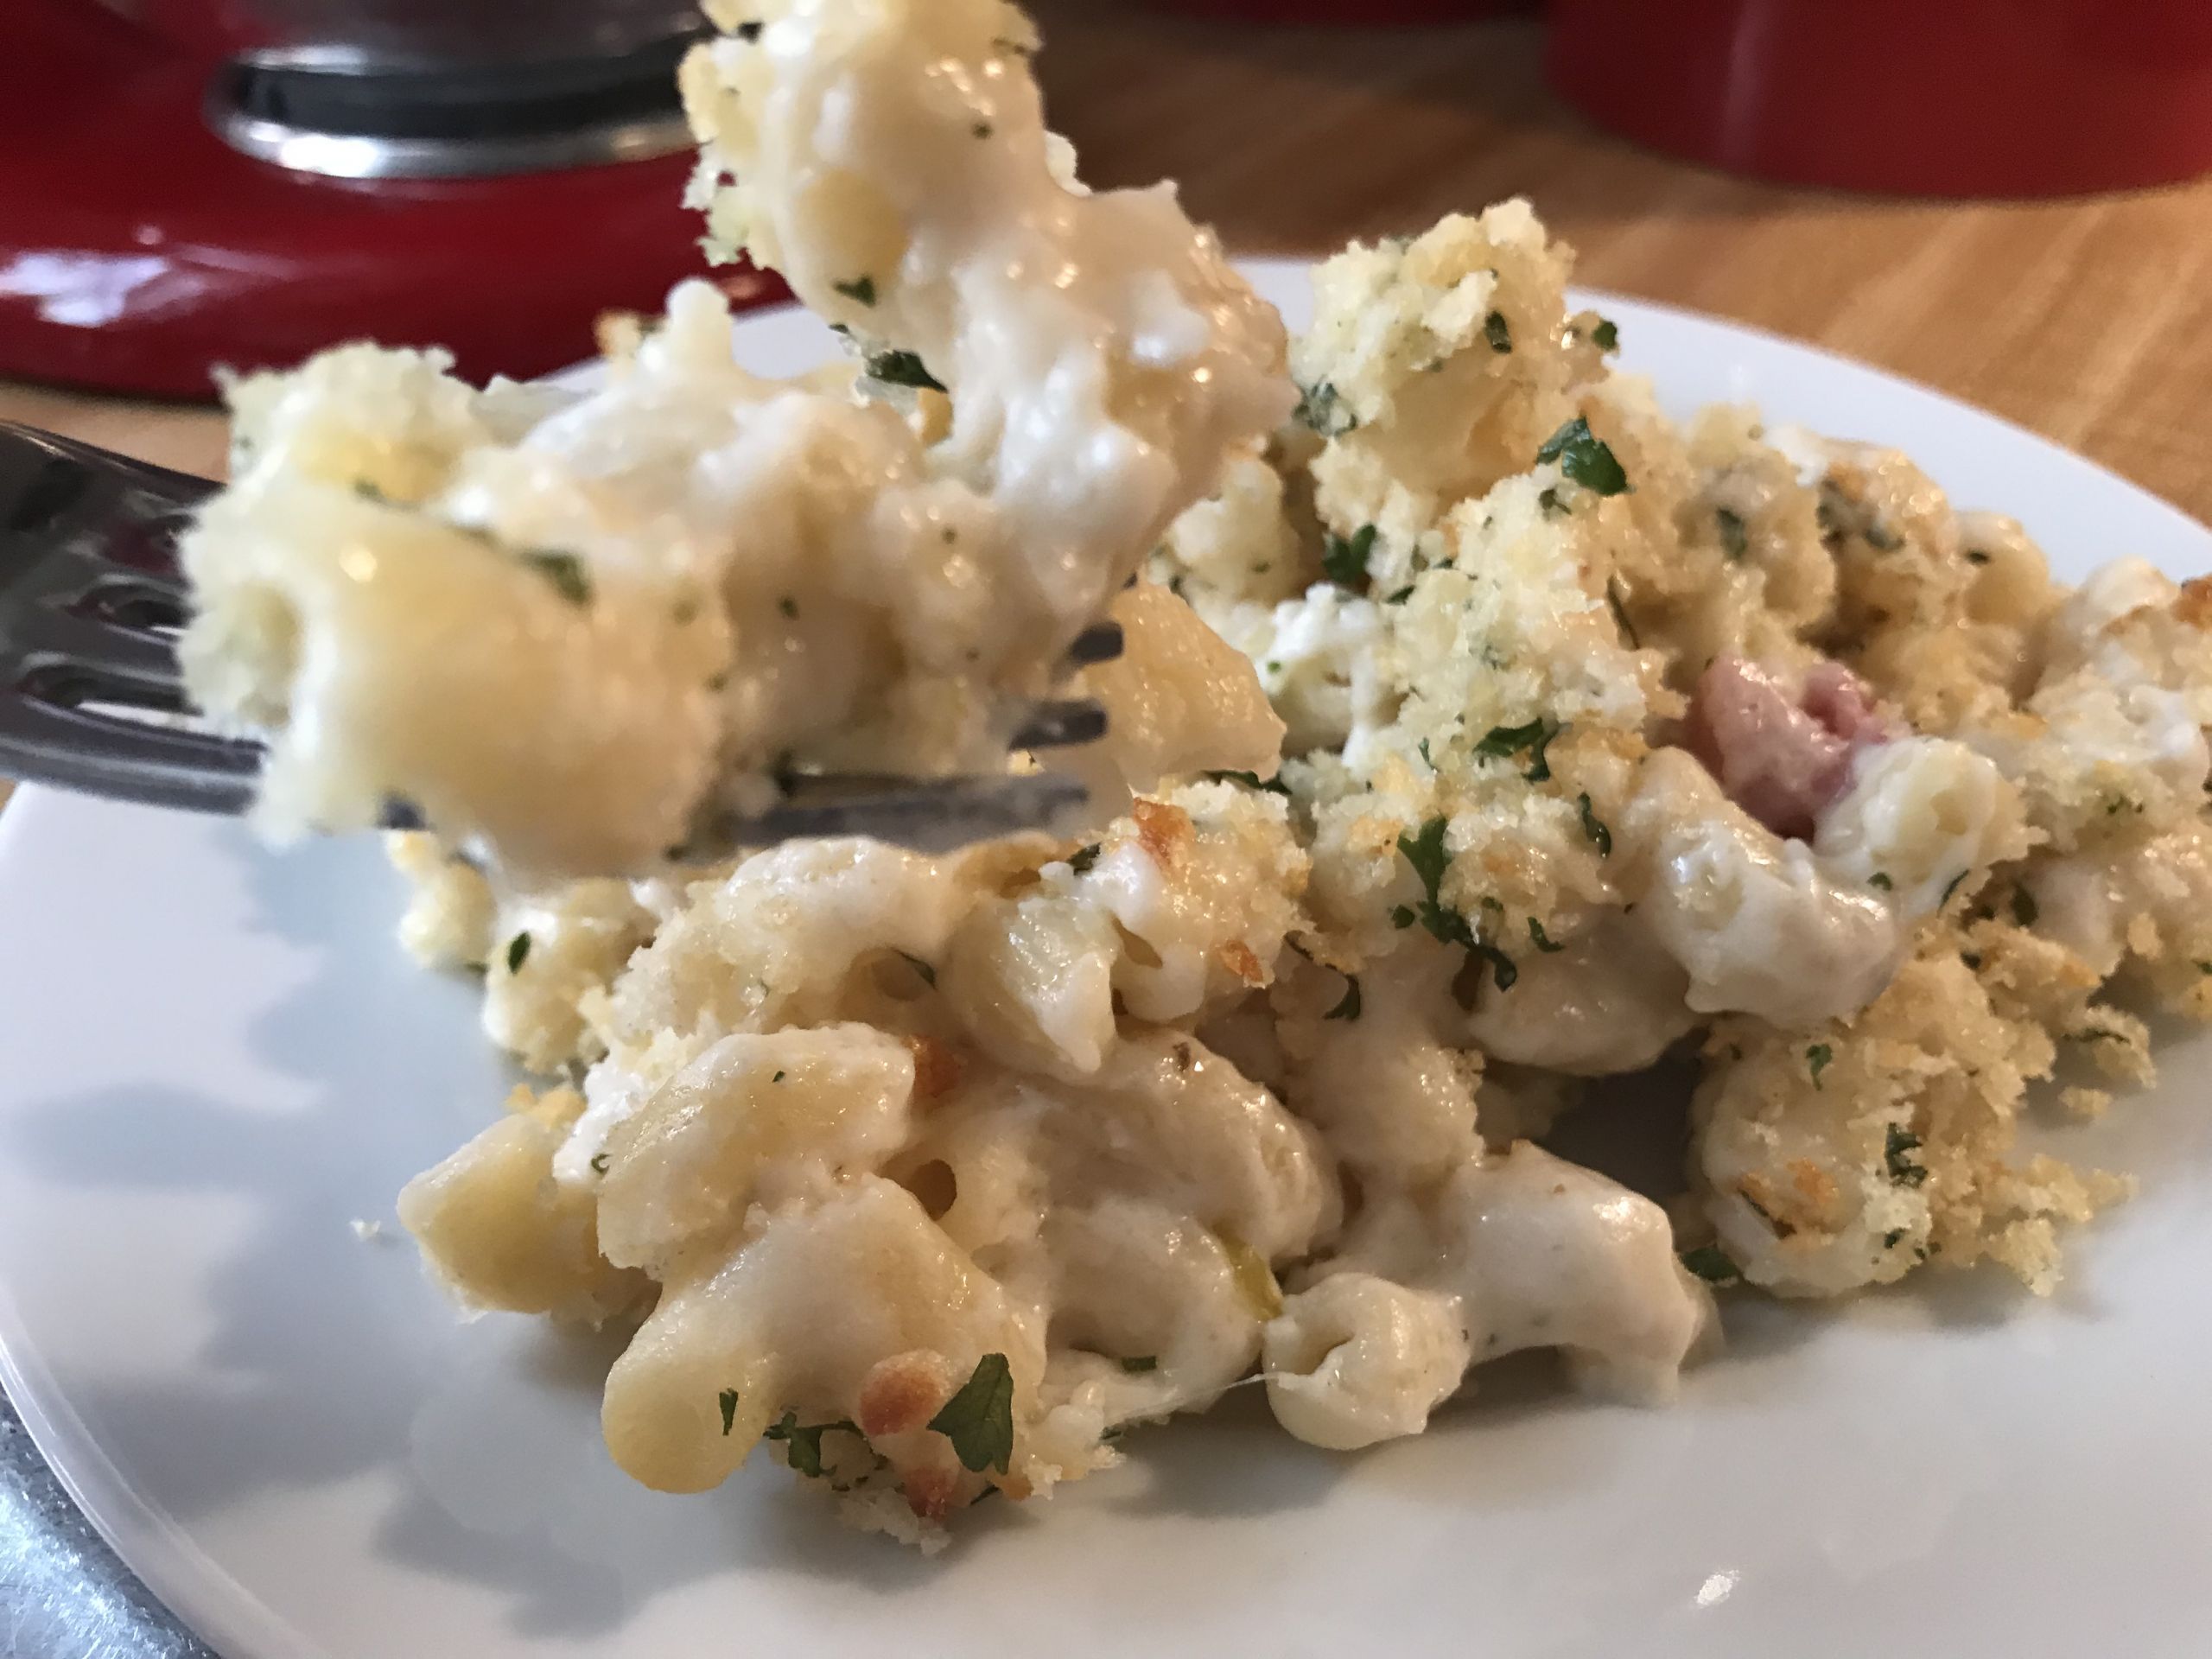 Reheating Baked Macaroni And Cheese Baked White Cheddar Mac & Cheese With Smoked Sausage